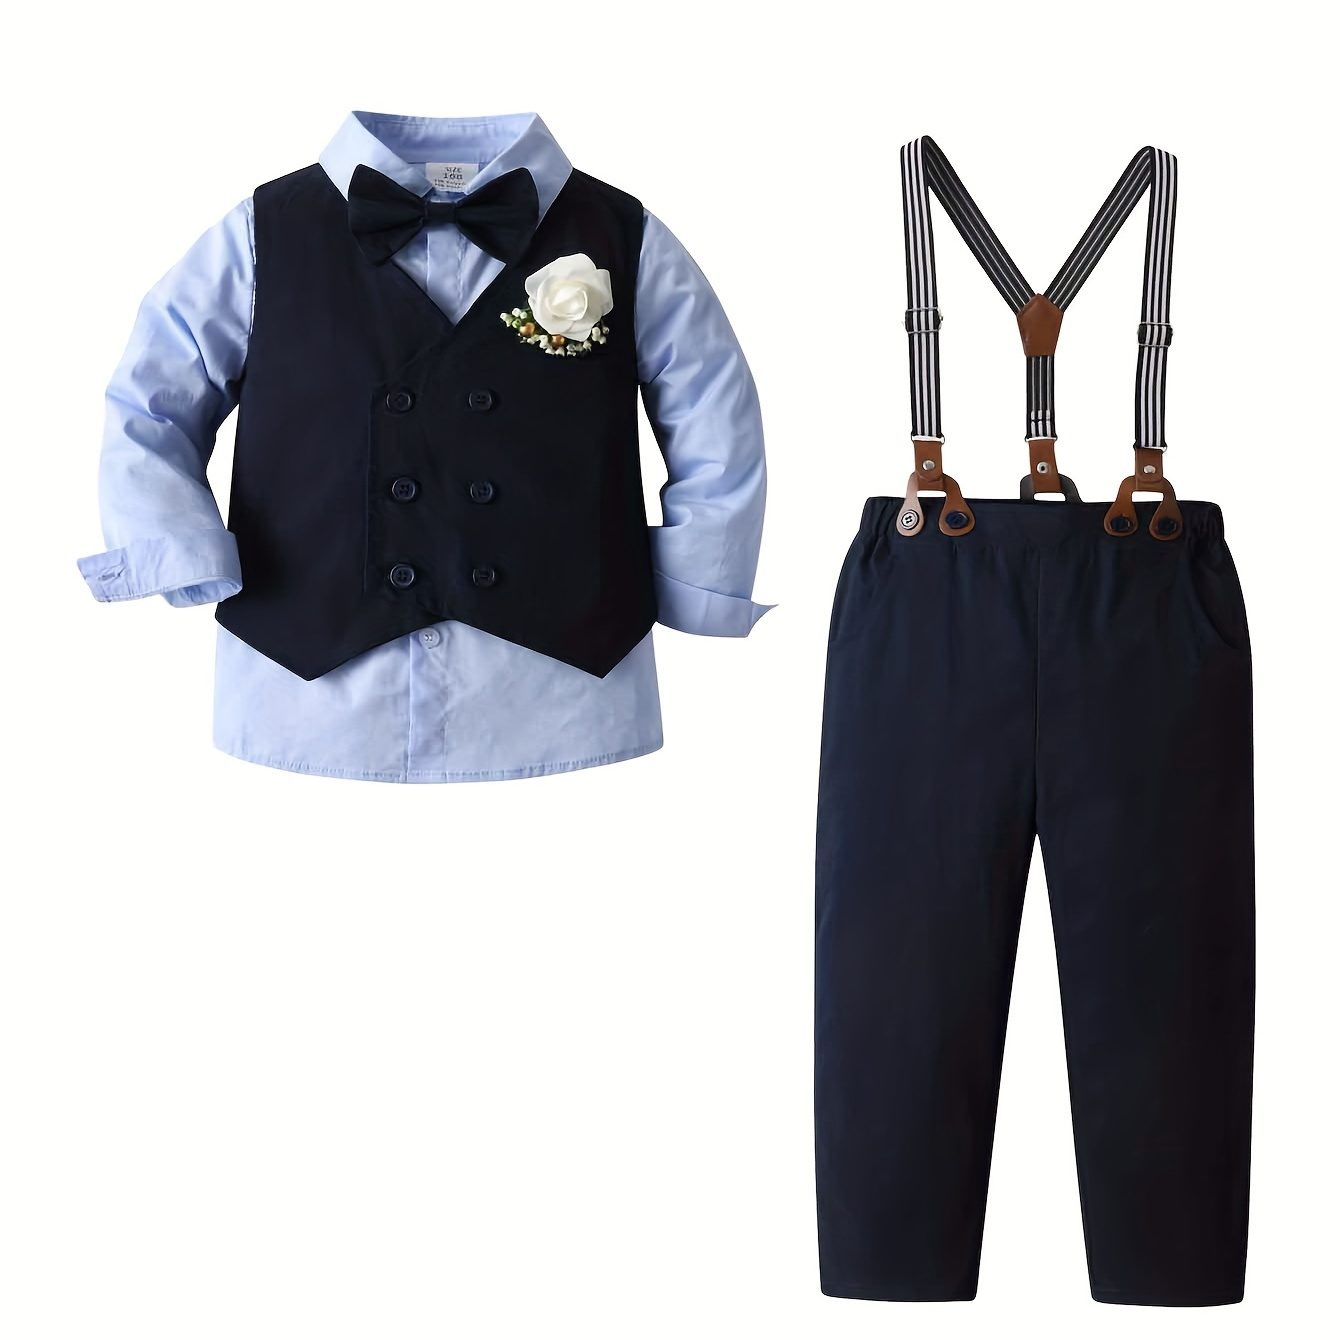 

3pcs Boy's Gentleman Outfit, Bowtie Shirt & Vest & Overalls Set, Formal Wear For Speech Performance Birthday Party, Kid's Clothes For Spring Fall Winter